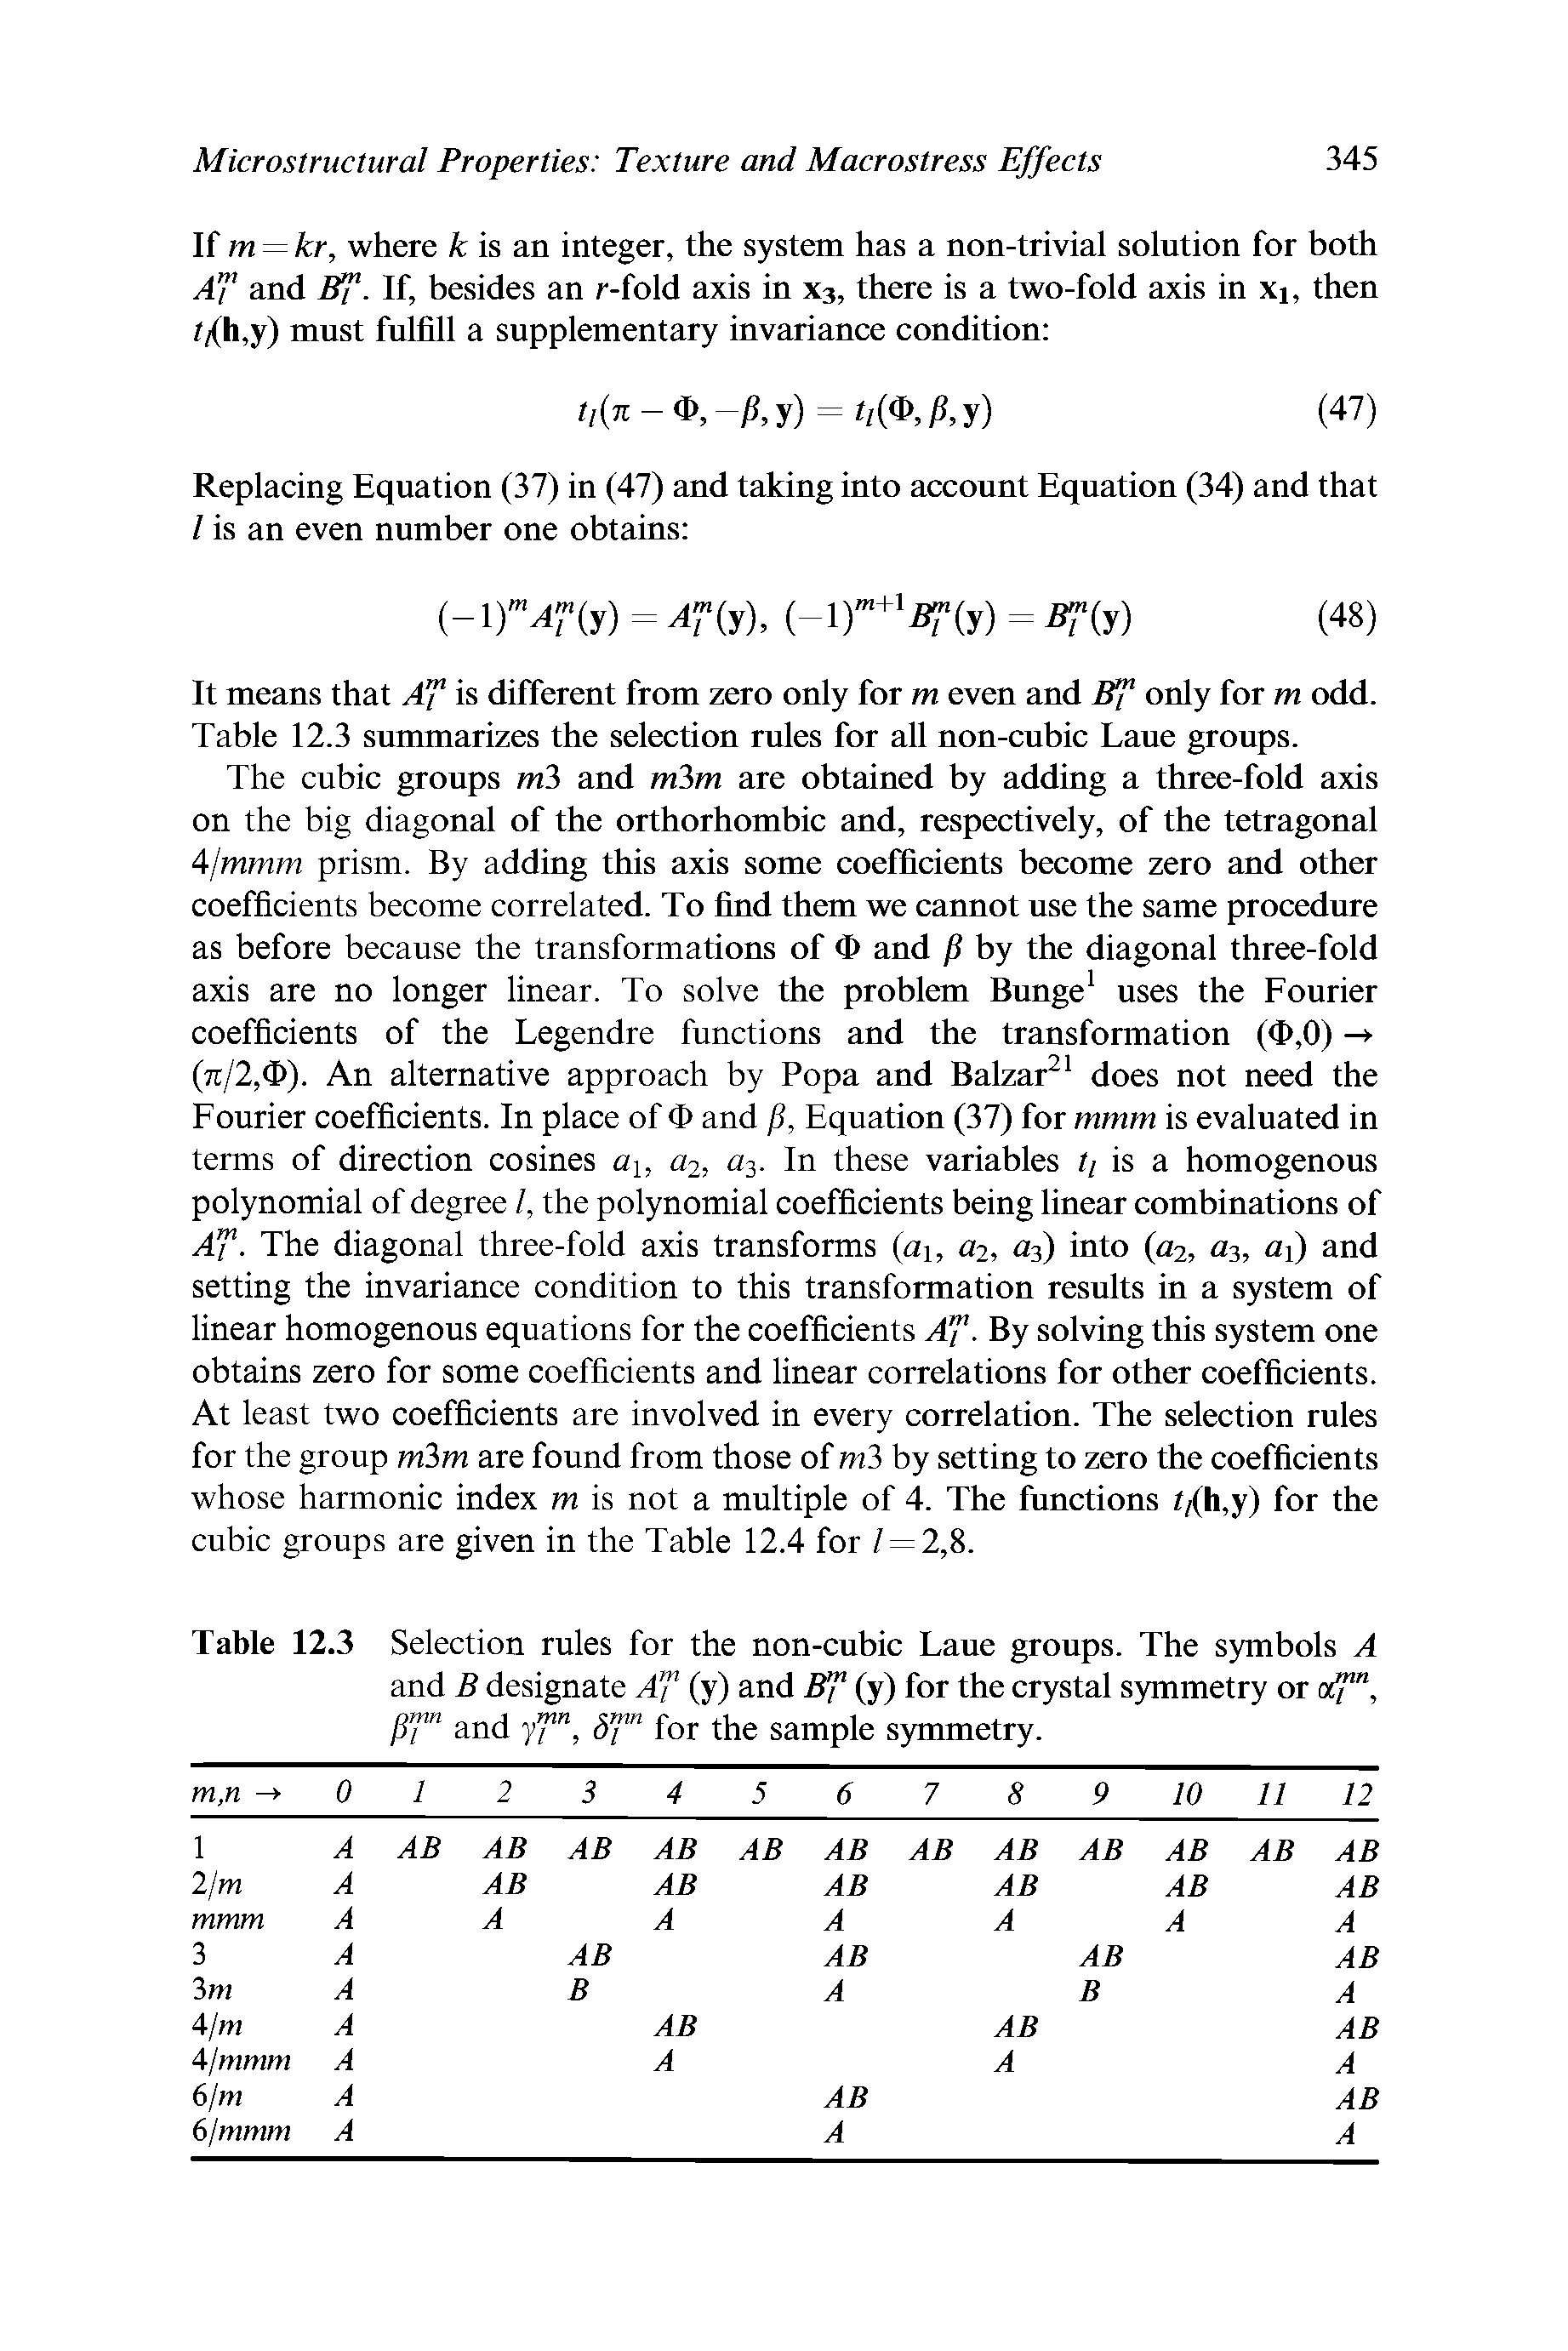 Table 12.3 Selection rules for the non-cubic Laue groups. The symbols A and B designate Af (y) and Bf (y) for the crystal symmetry or of", jS and yT ", for the sample symmetry.